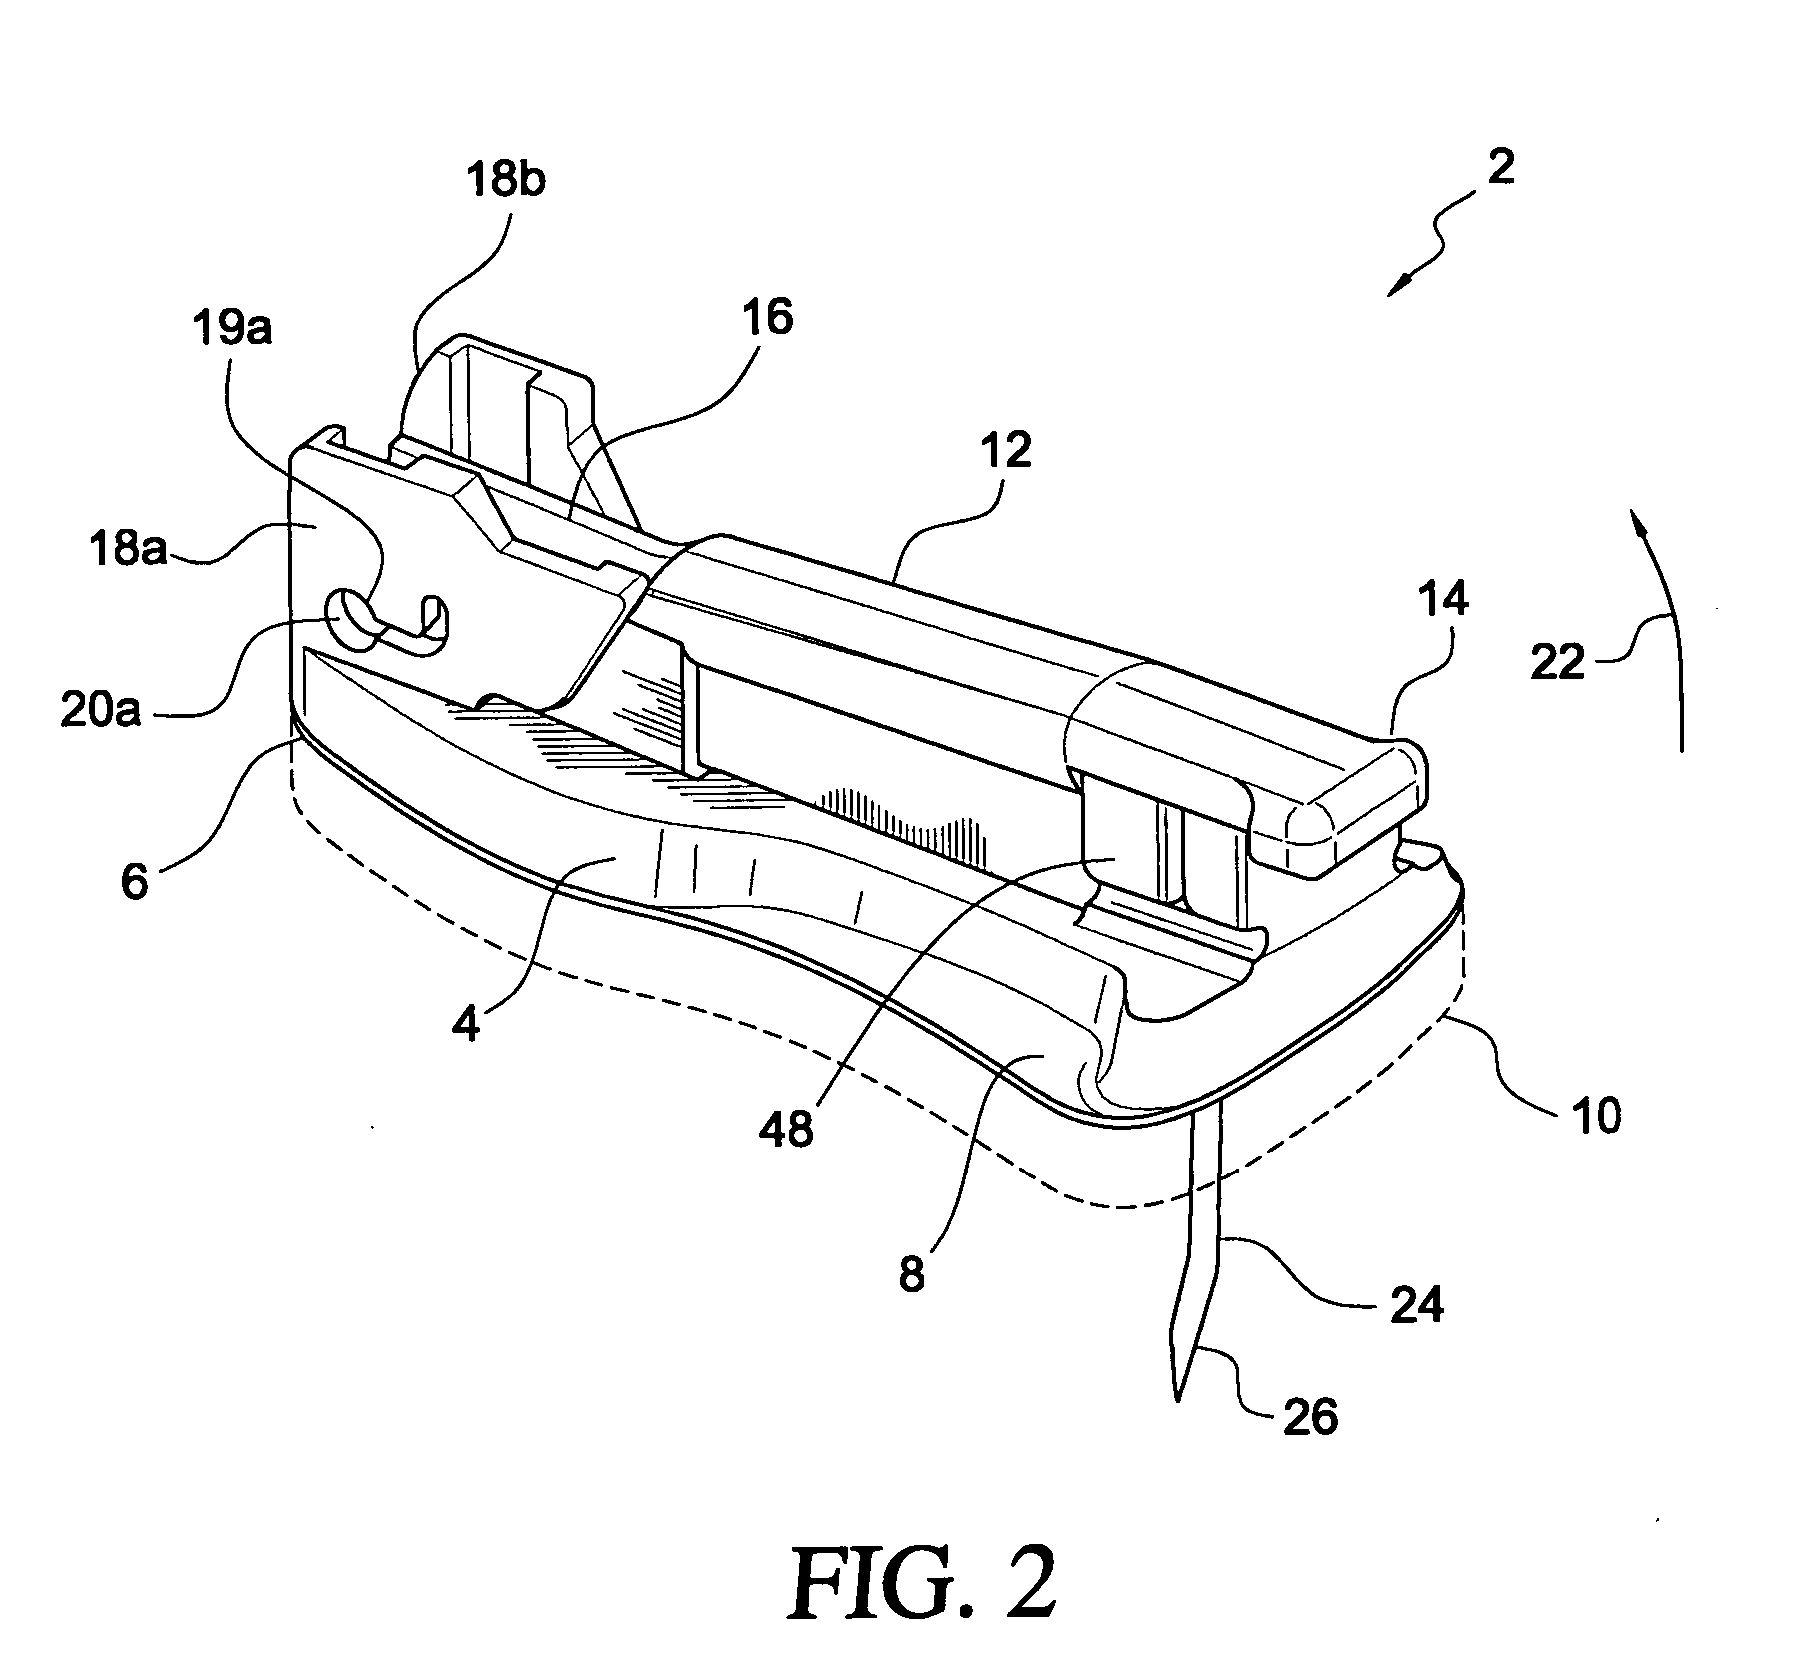 Removable sharps device for accessing a portal reservoir